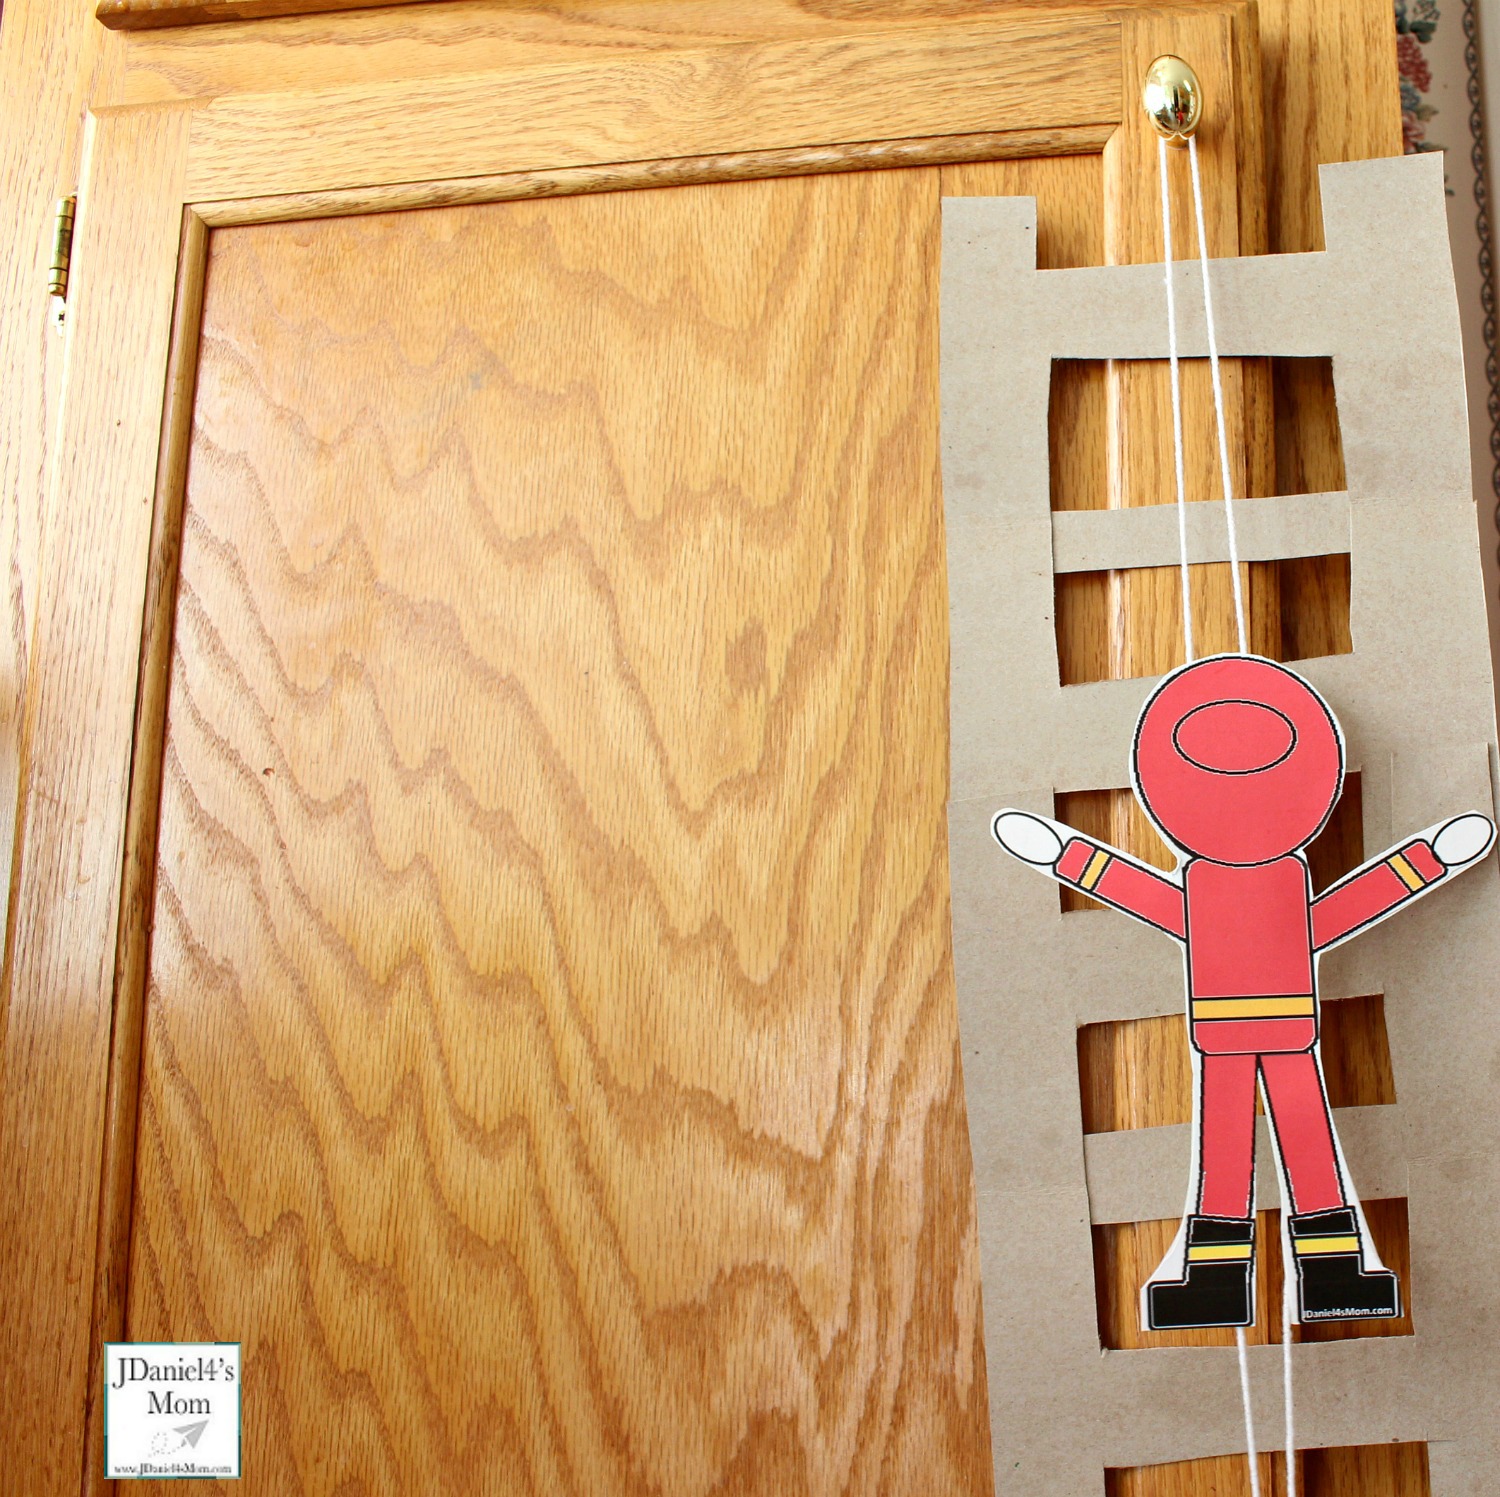 Climbing Firefighter STEAM Activity for Kids - Attached to the Cabinet Knob